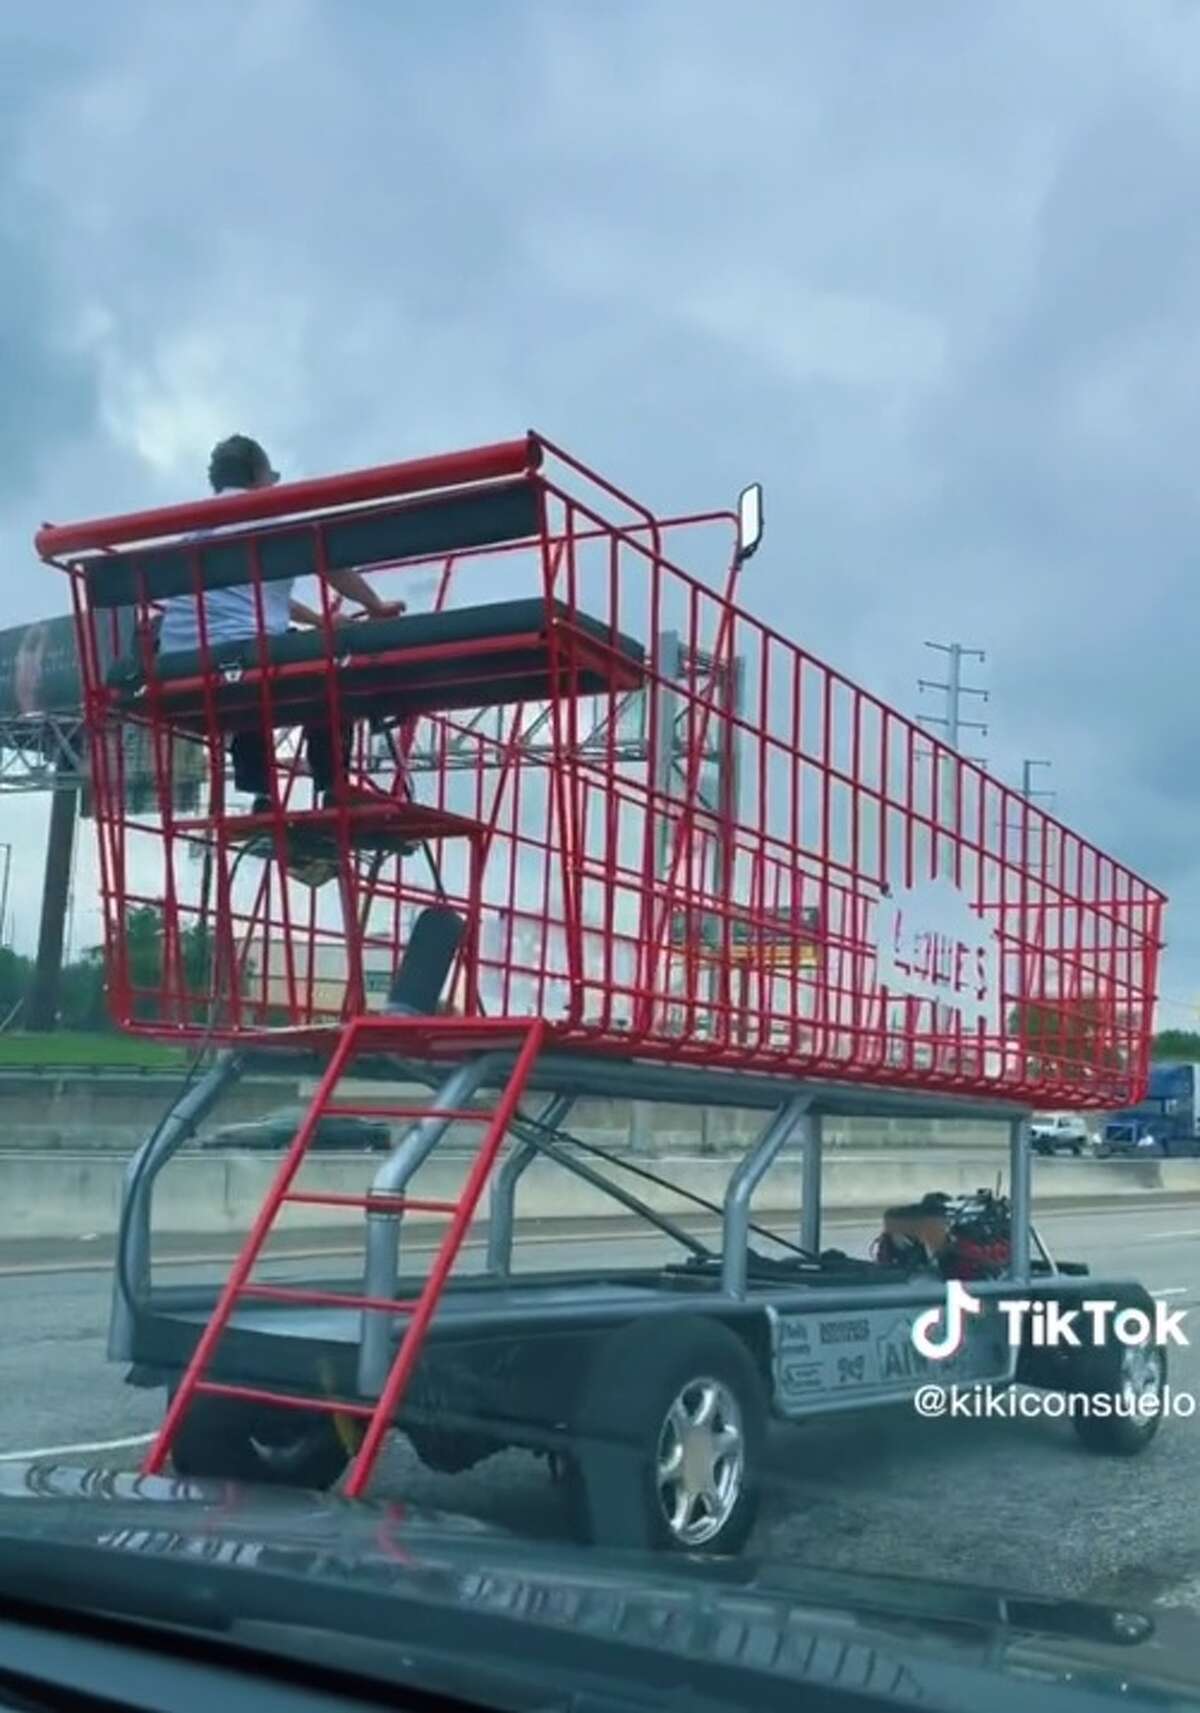 An oversized and motorized shopping cart is seen driving on San Antonio's Loop 410 in this screen capture from a TikTok video.